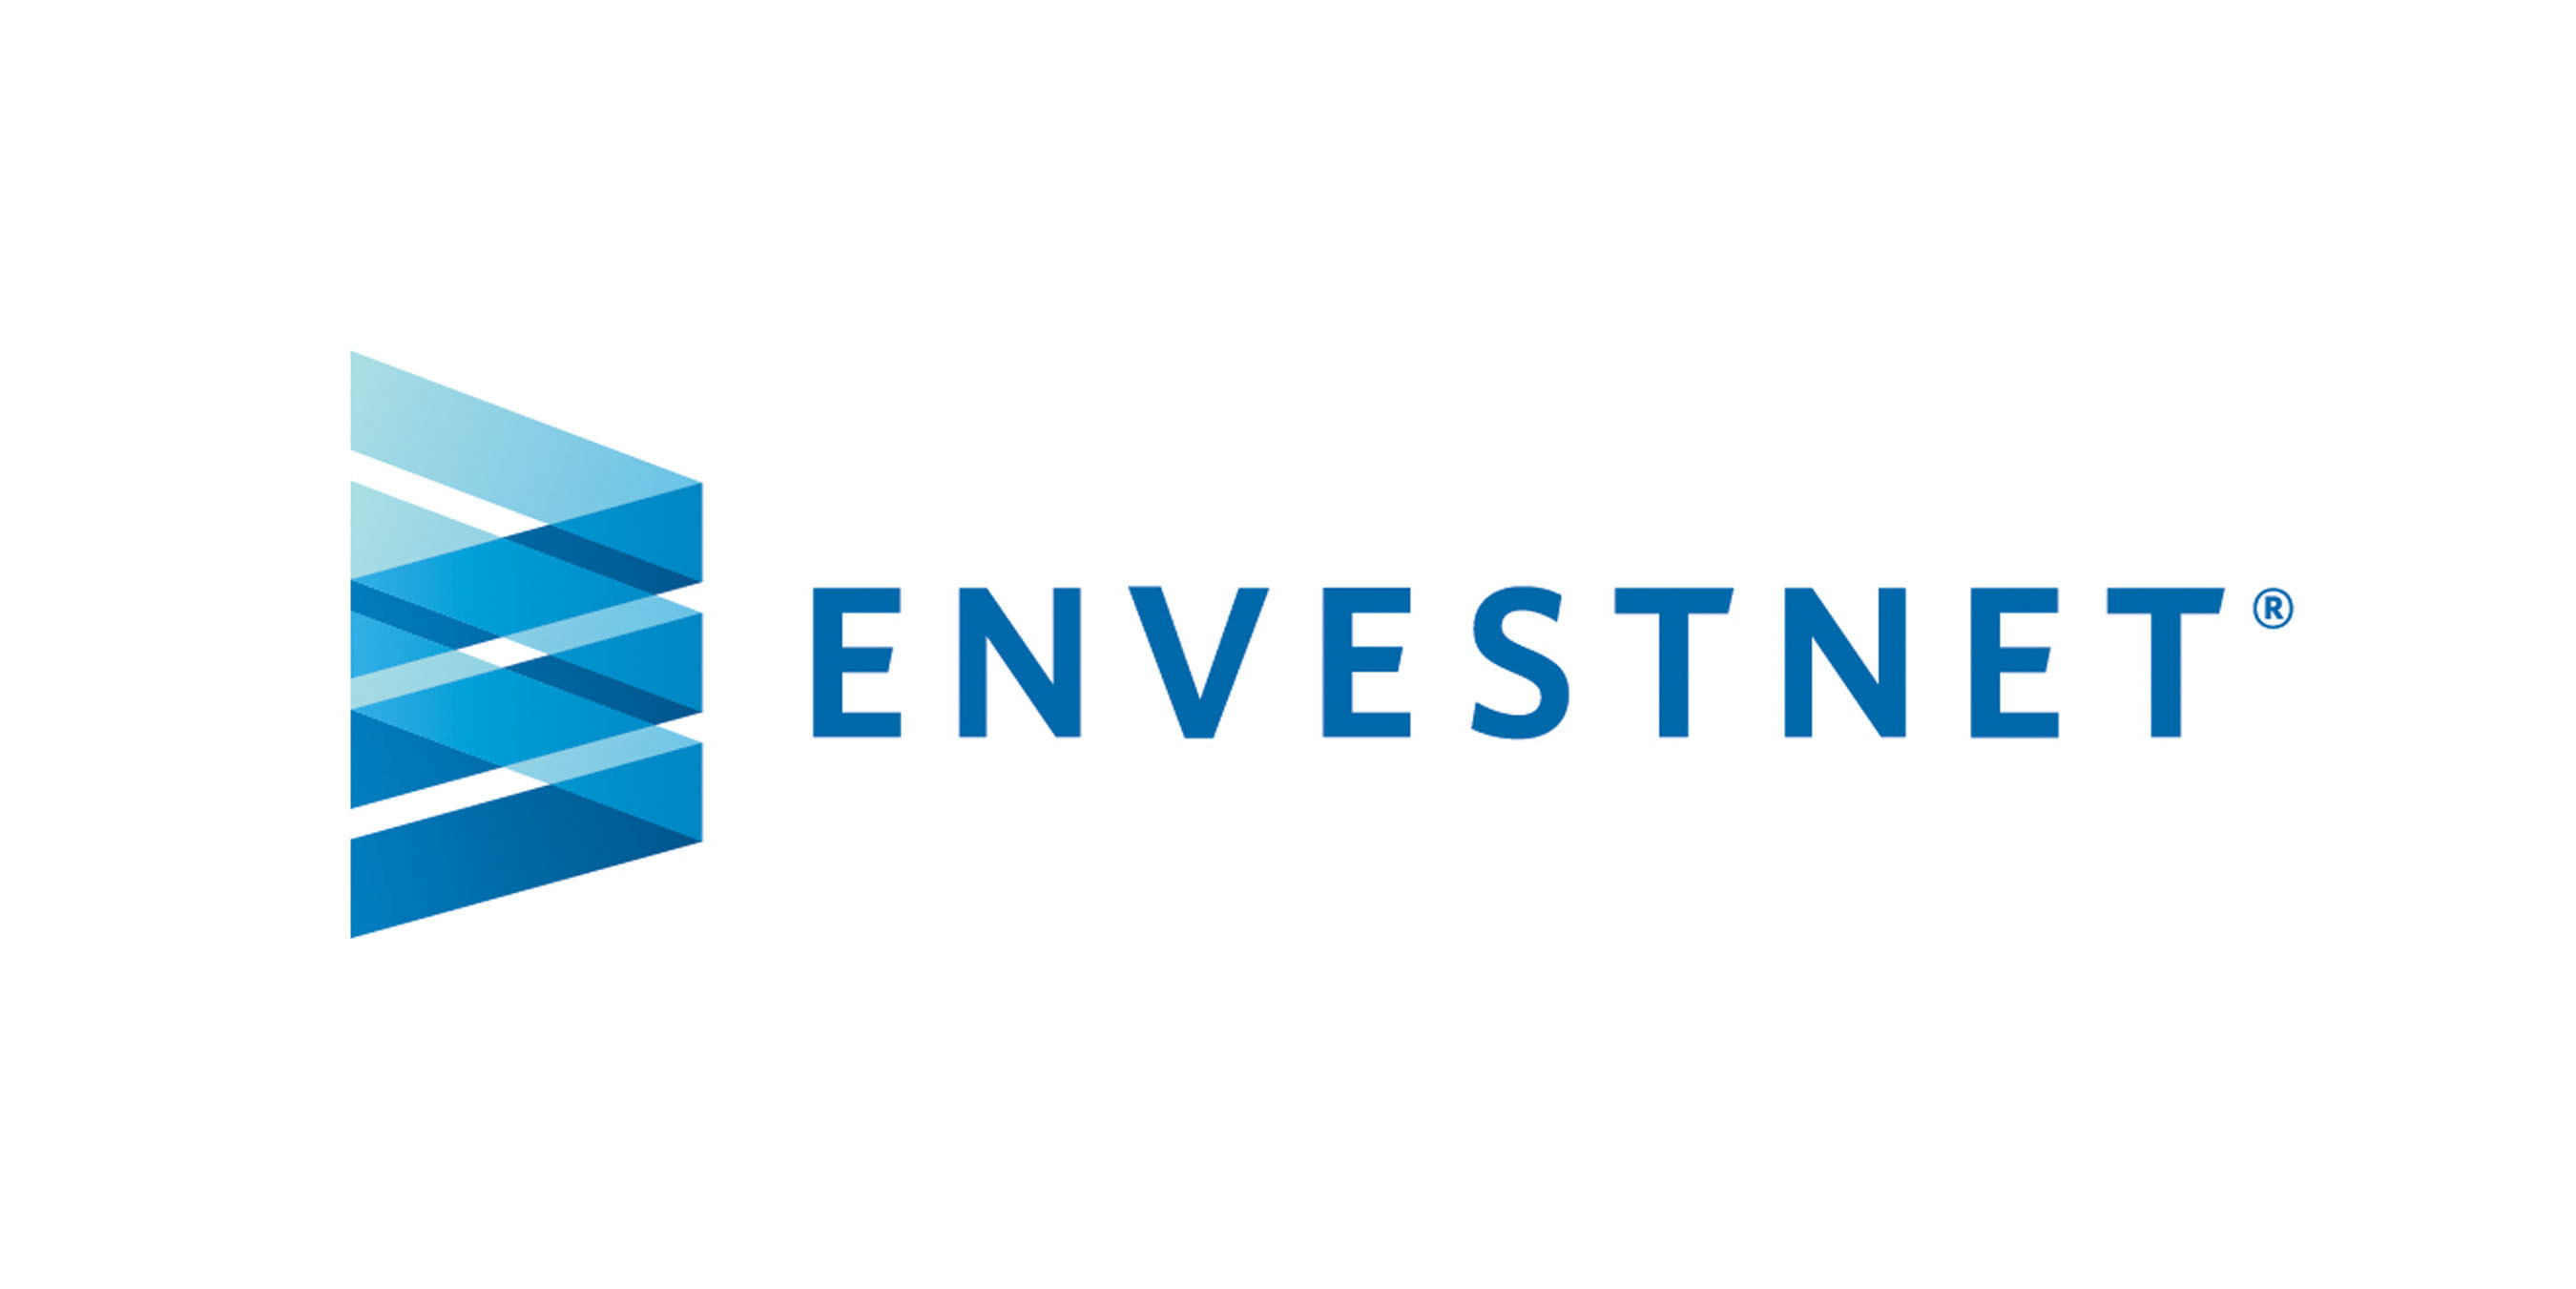 Envestnet, Inc. (NYSE: ENV) is a leading provider of unified wealth management technology and services to investment advisors. Our open-architecture platforms unify and fortify the wealth management process, delivering unparalleled flexibility, accuracy, performance and value. Envestnet solutions enable the transformation of wealth management into a transparent, independent, objective and fully-aligned standard of care, and empower advisors to deliver better outcomes. For more information on Envestnet, please visit www.envestnet.com. (PRNewsFoto/Envestnet, Inc.)